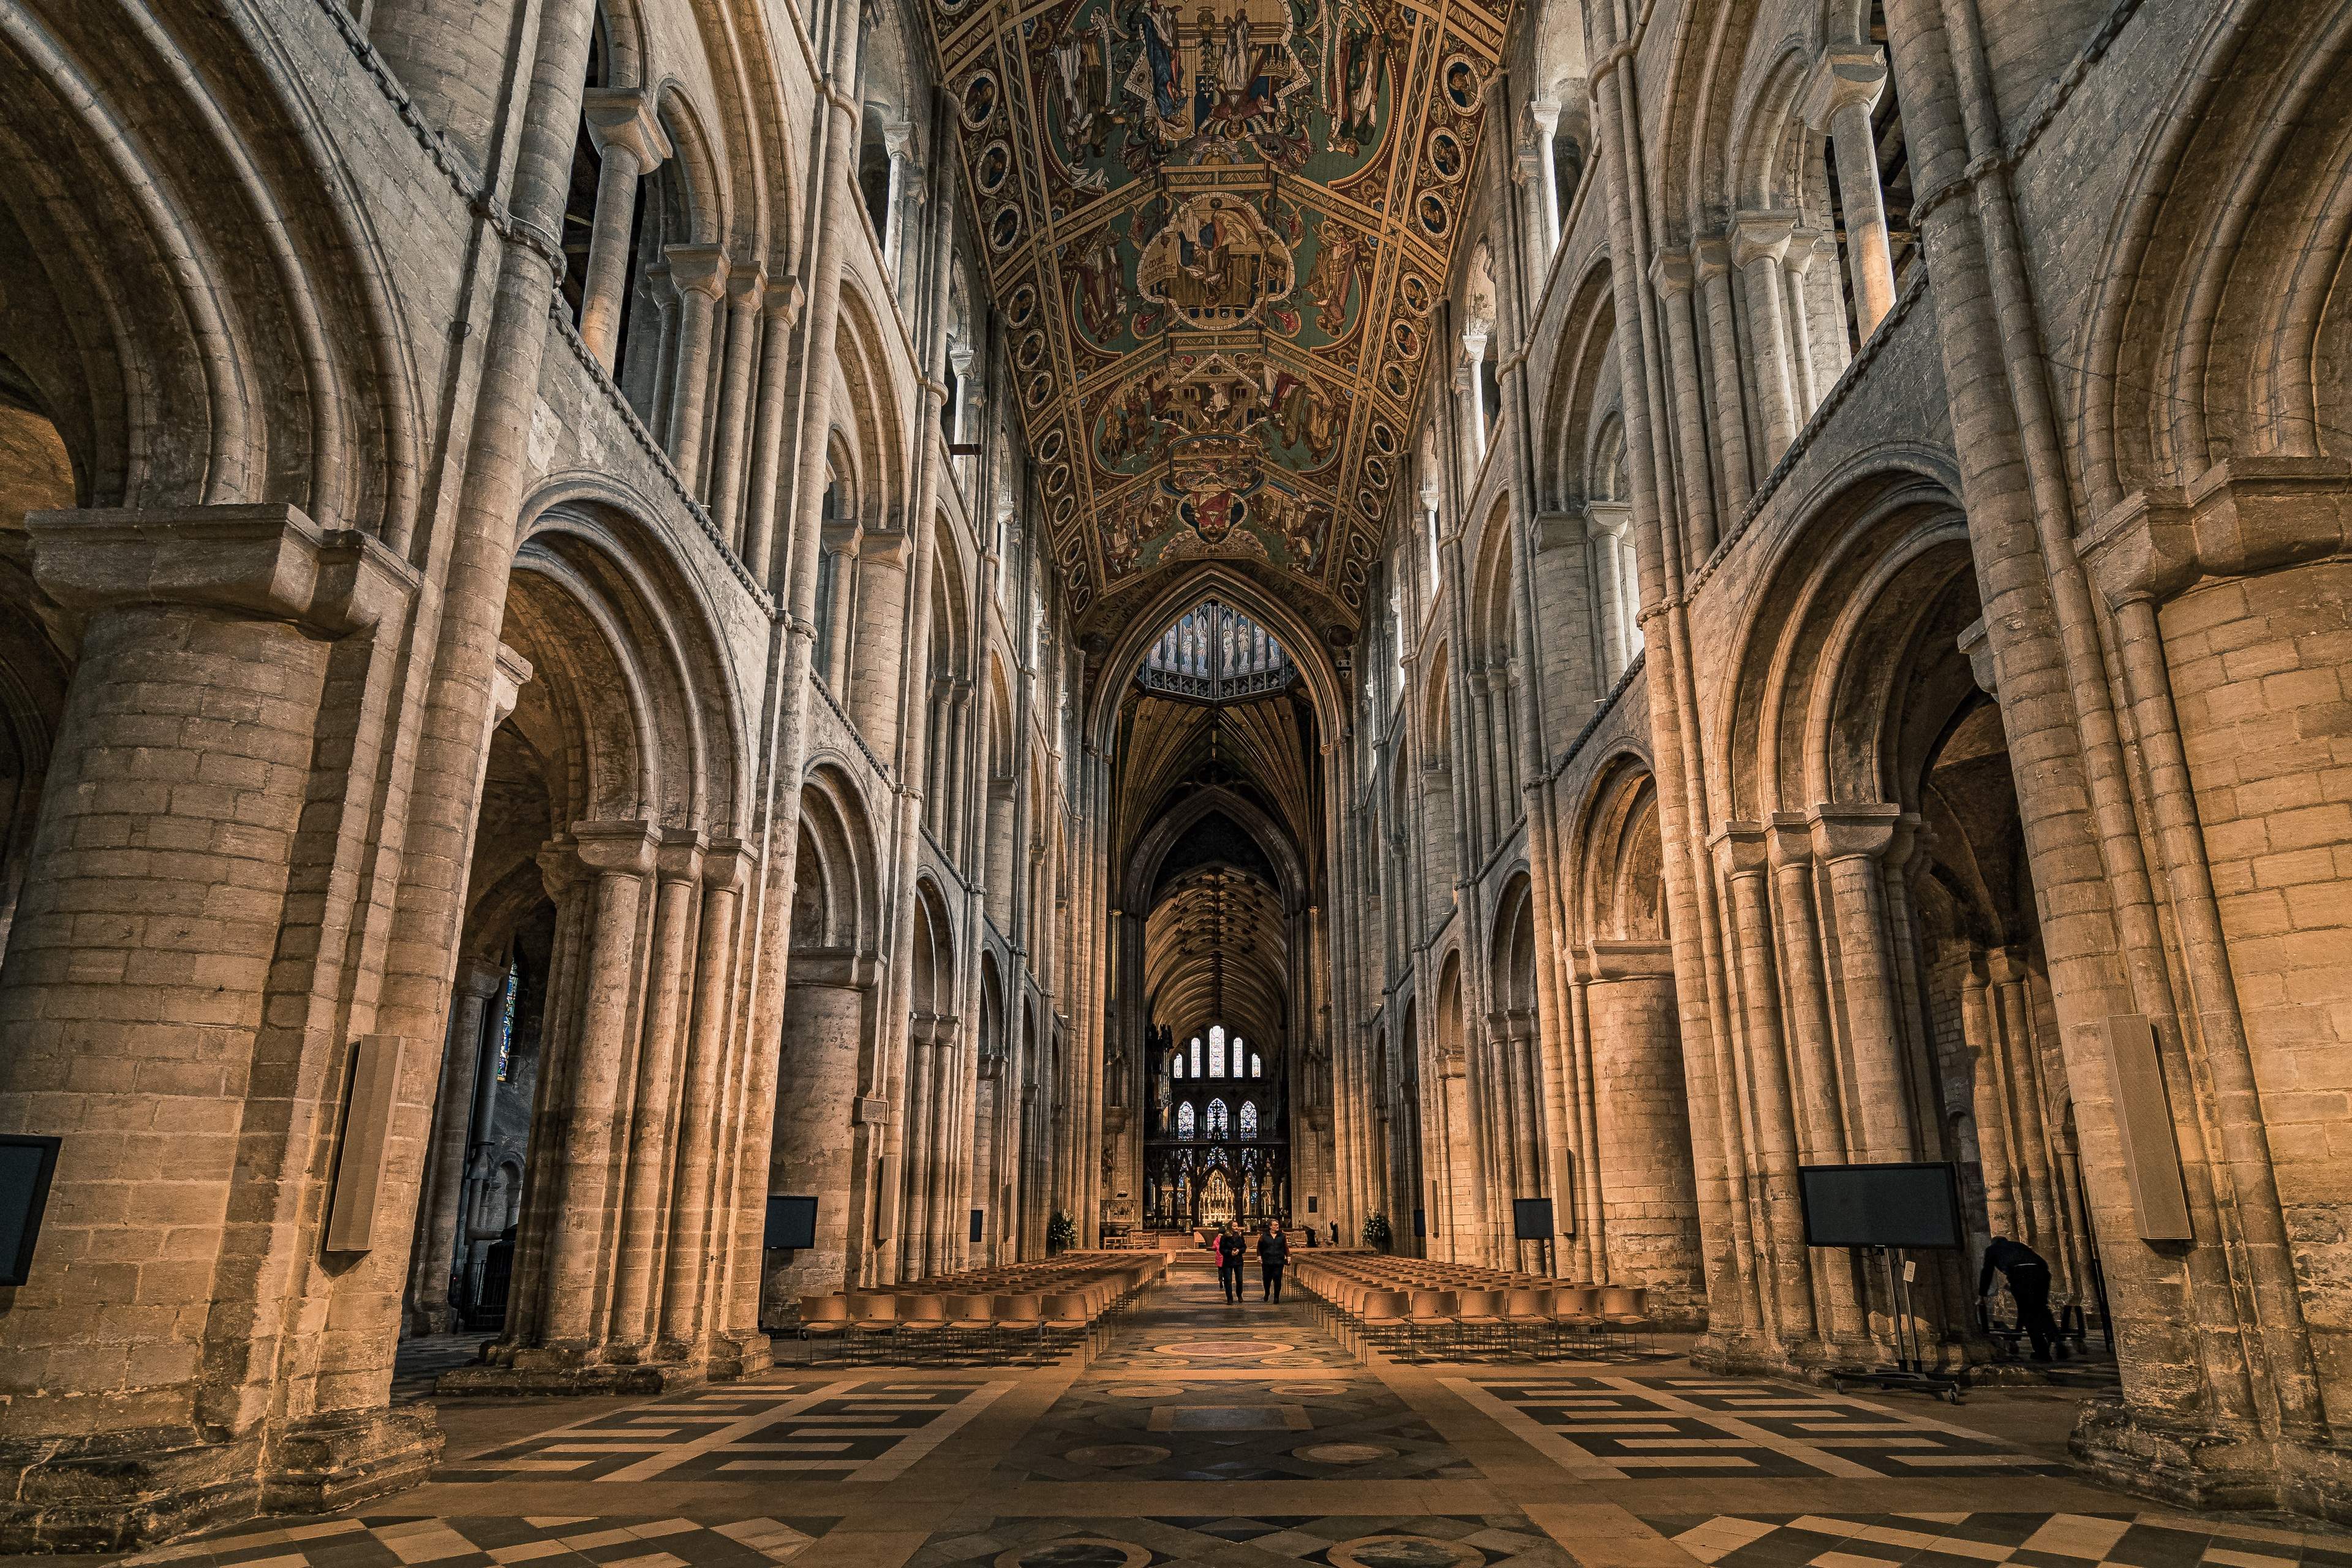 The Nave of Ely Cathedral, Ely, Cambridgeshire, UK